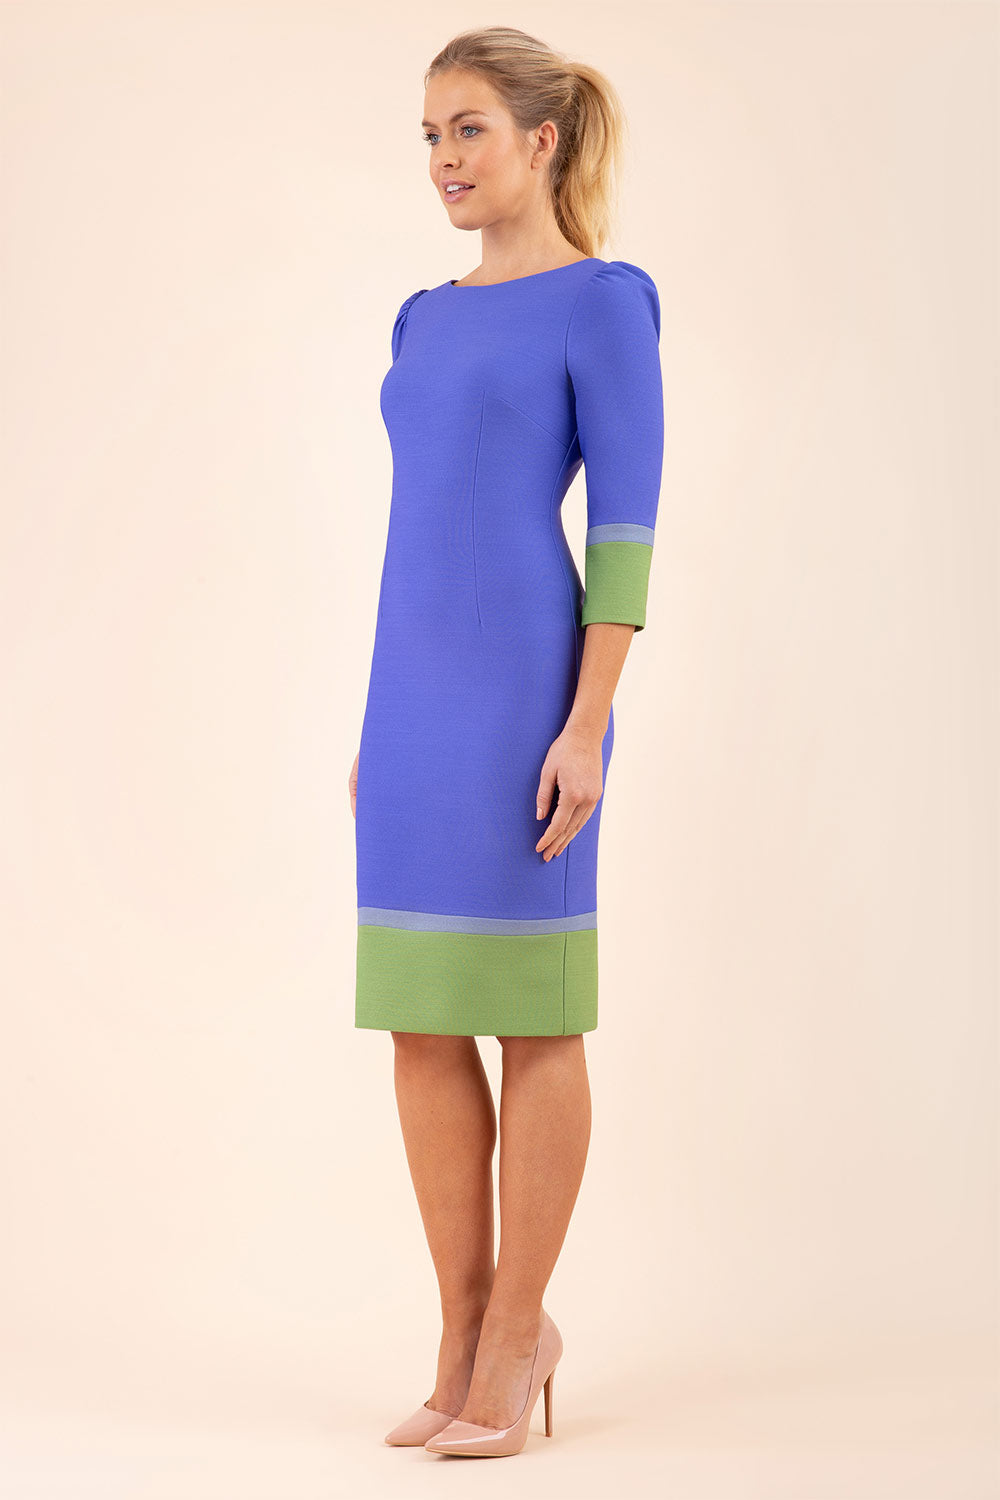 Seed Provence Sleeved Colour Block Pencil Dress